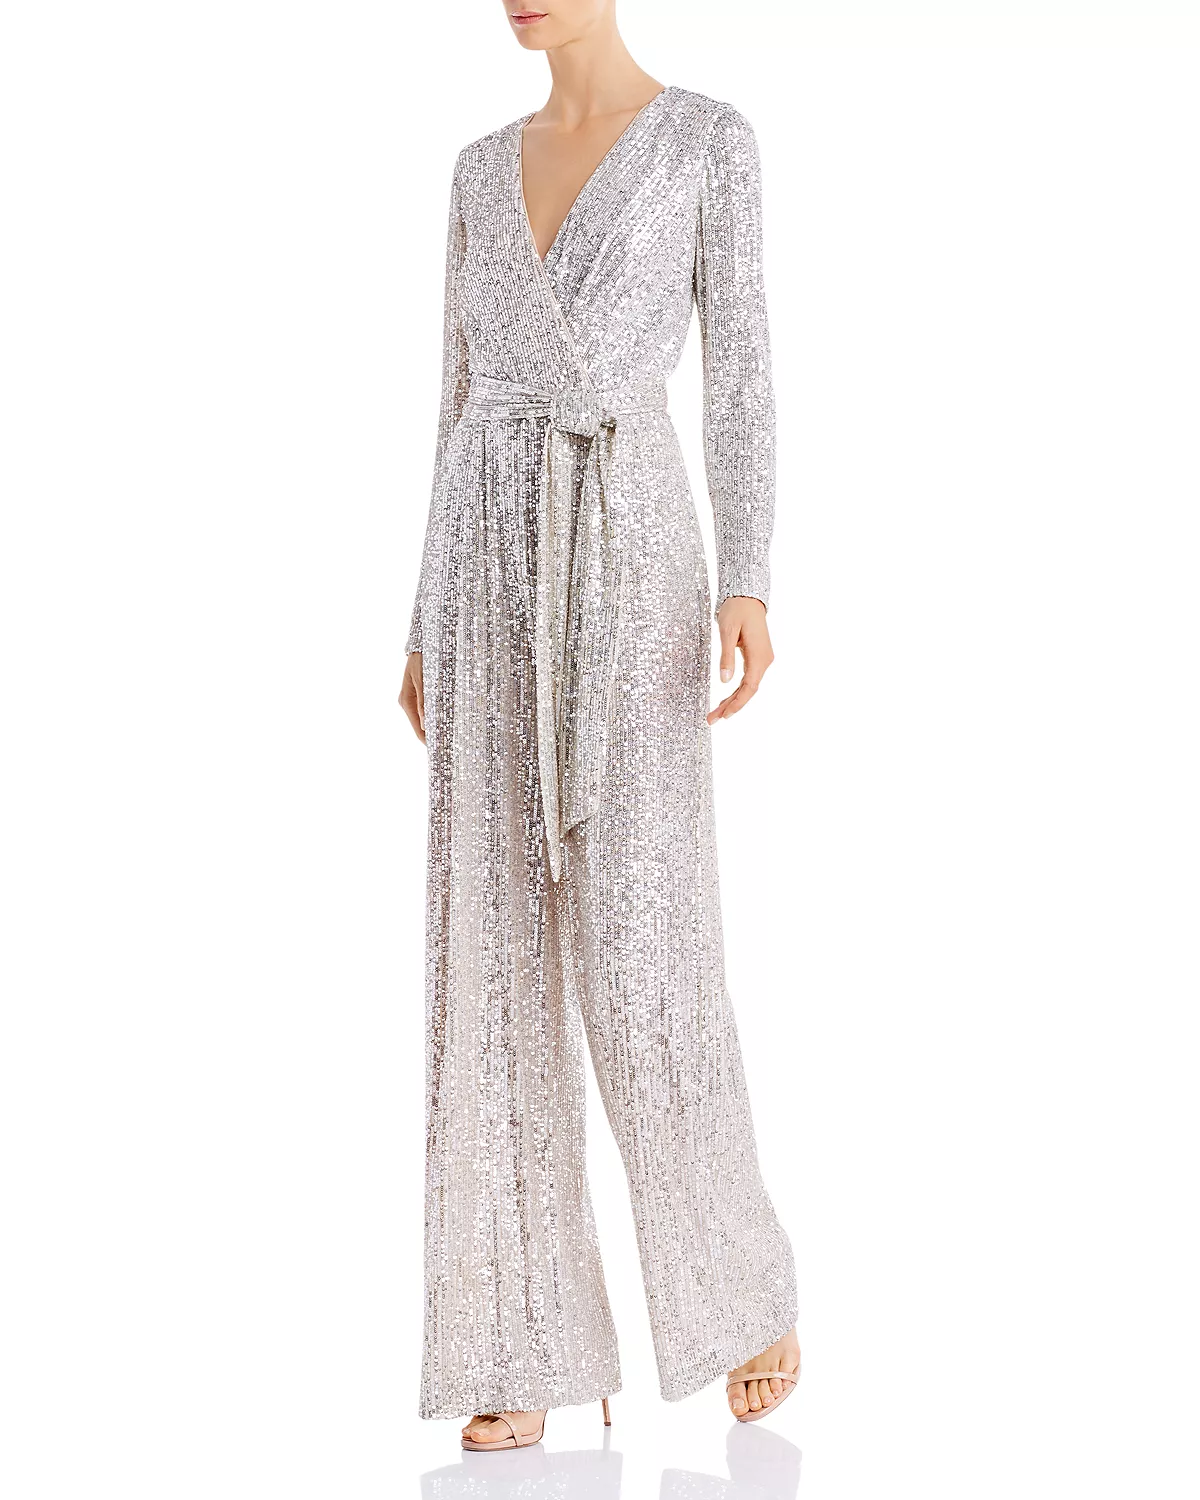 Eliza J Silver Sequin Faux Wrap Designer Jumpsuit for Evening, for Wedding, and for Mother of the Bride Jumpsuit